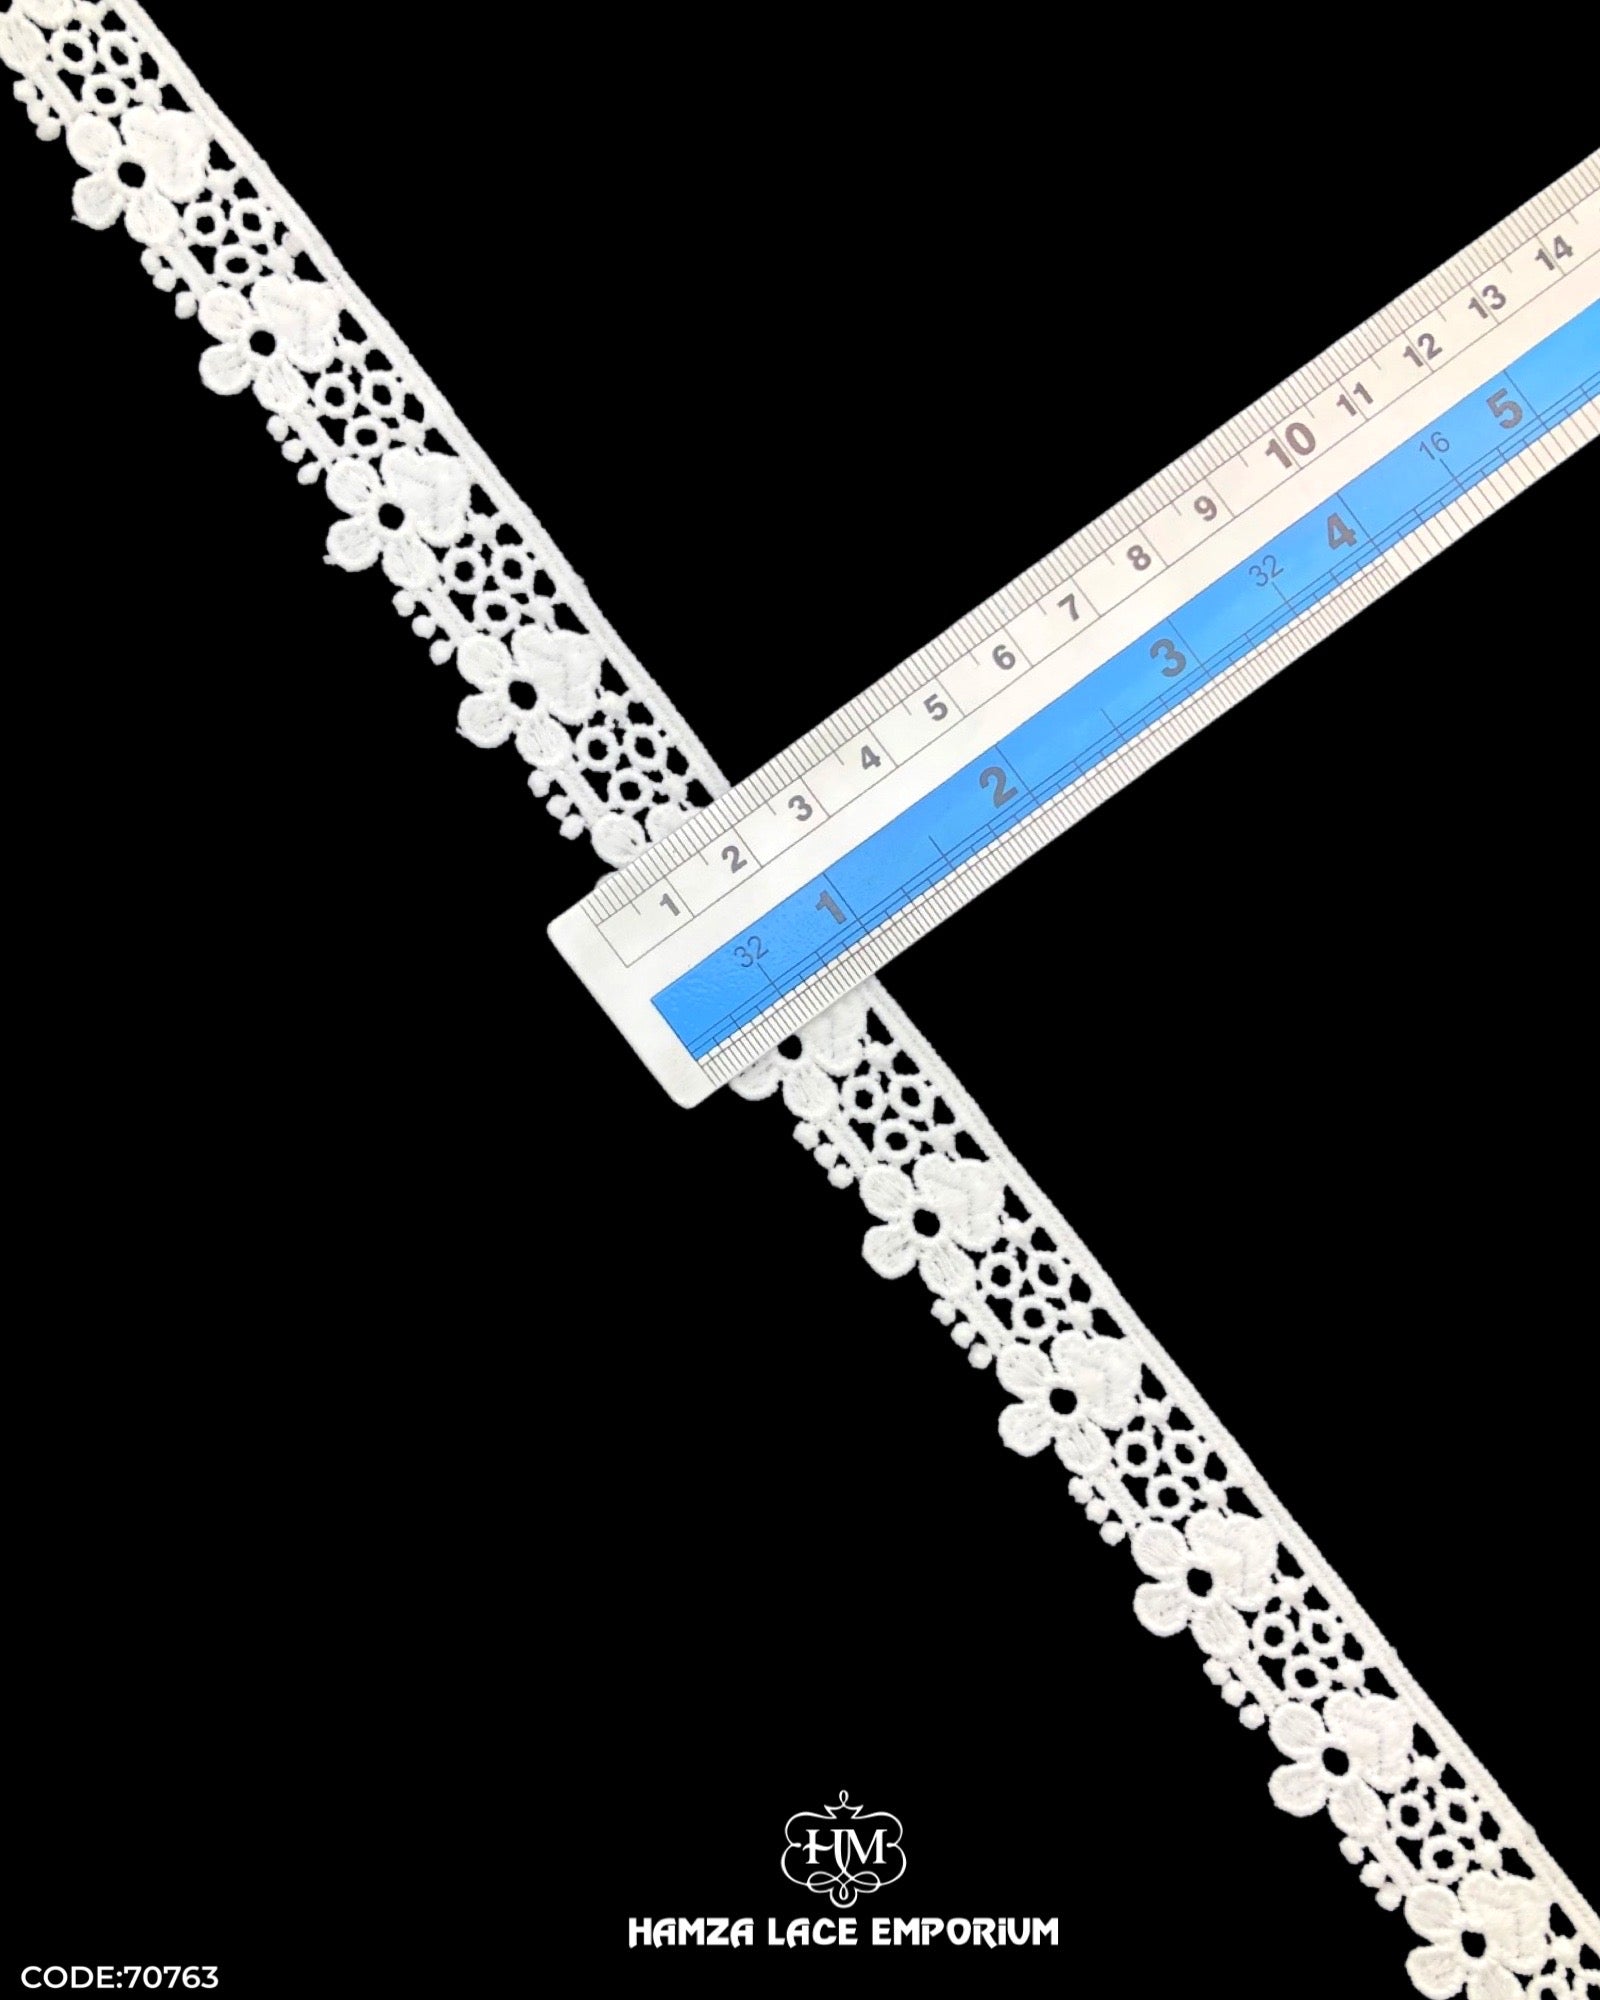 Size of the 'Edging Flower Lace 70763' is shown as '0.75' inches with the help of a ruler